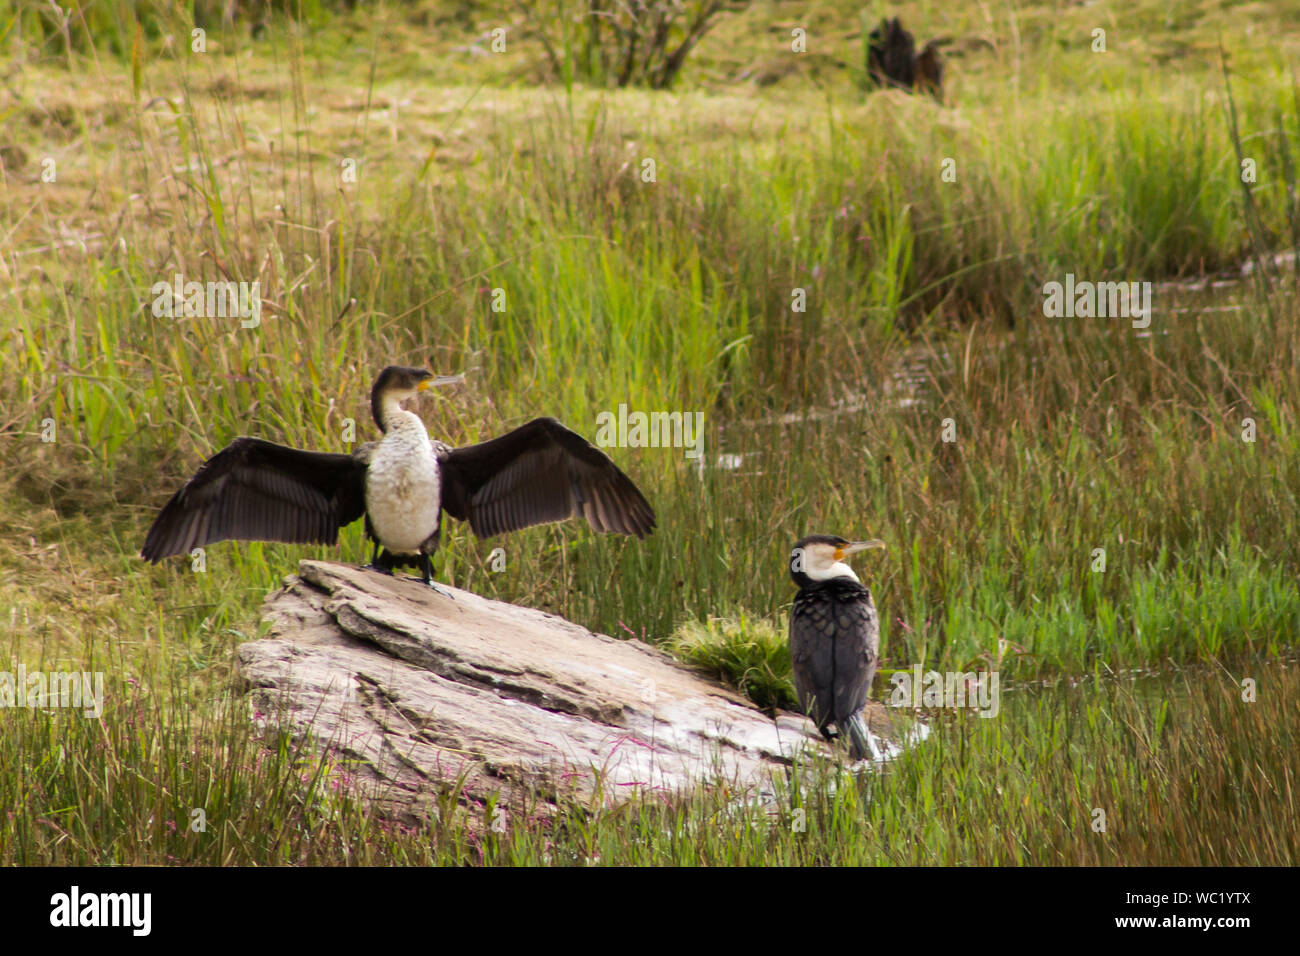 Two White-breasted Cormorants, one which are displaying the iconic Wing Spreading Behavior, photographed in the Drakensberg, South Africa Stock Photo